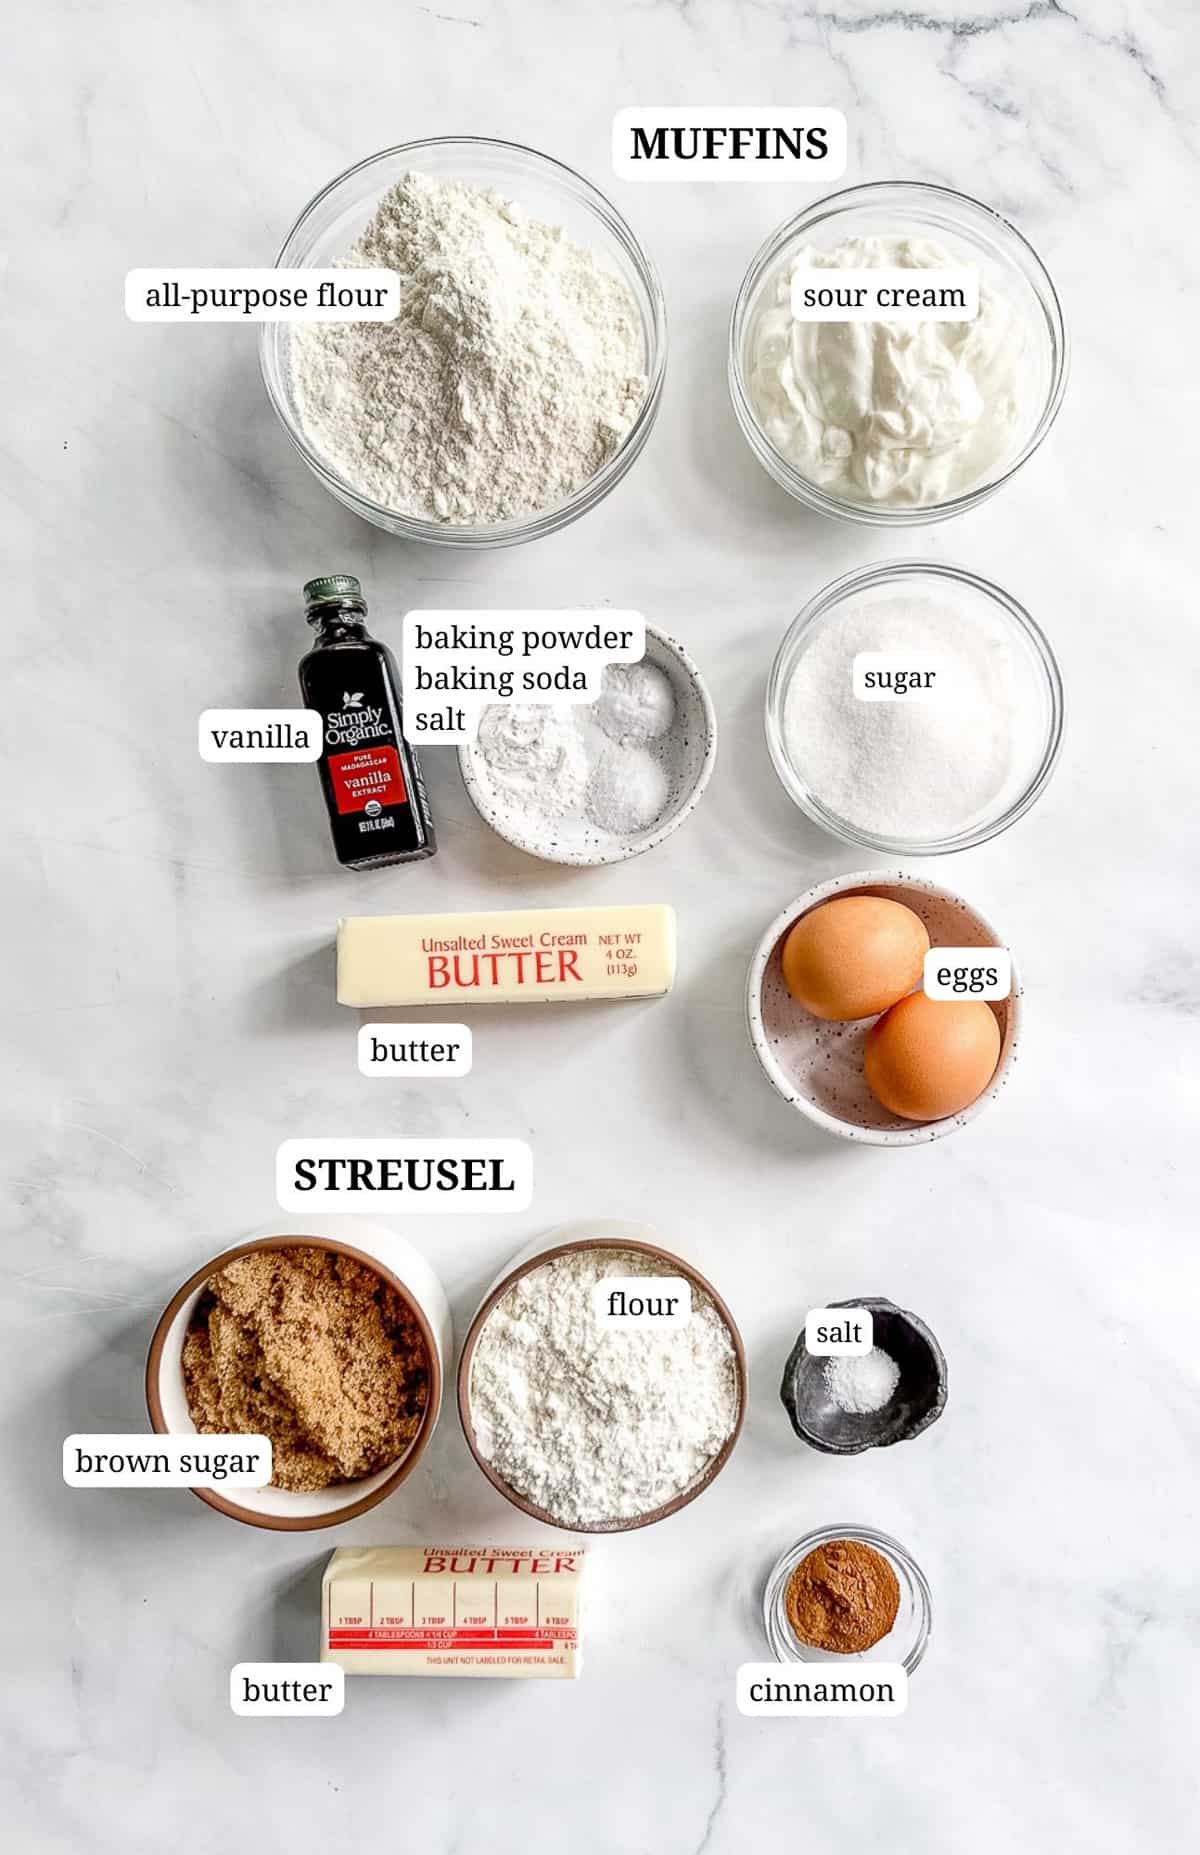 Ingredients to make sour cream coffee cake mufins.